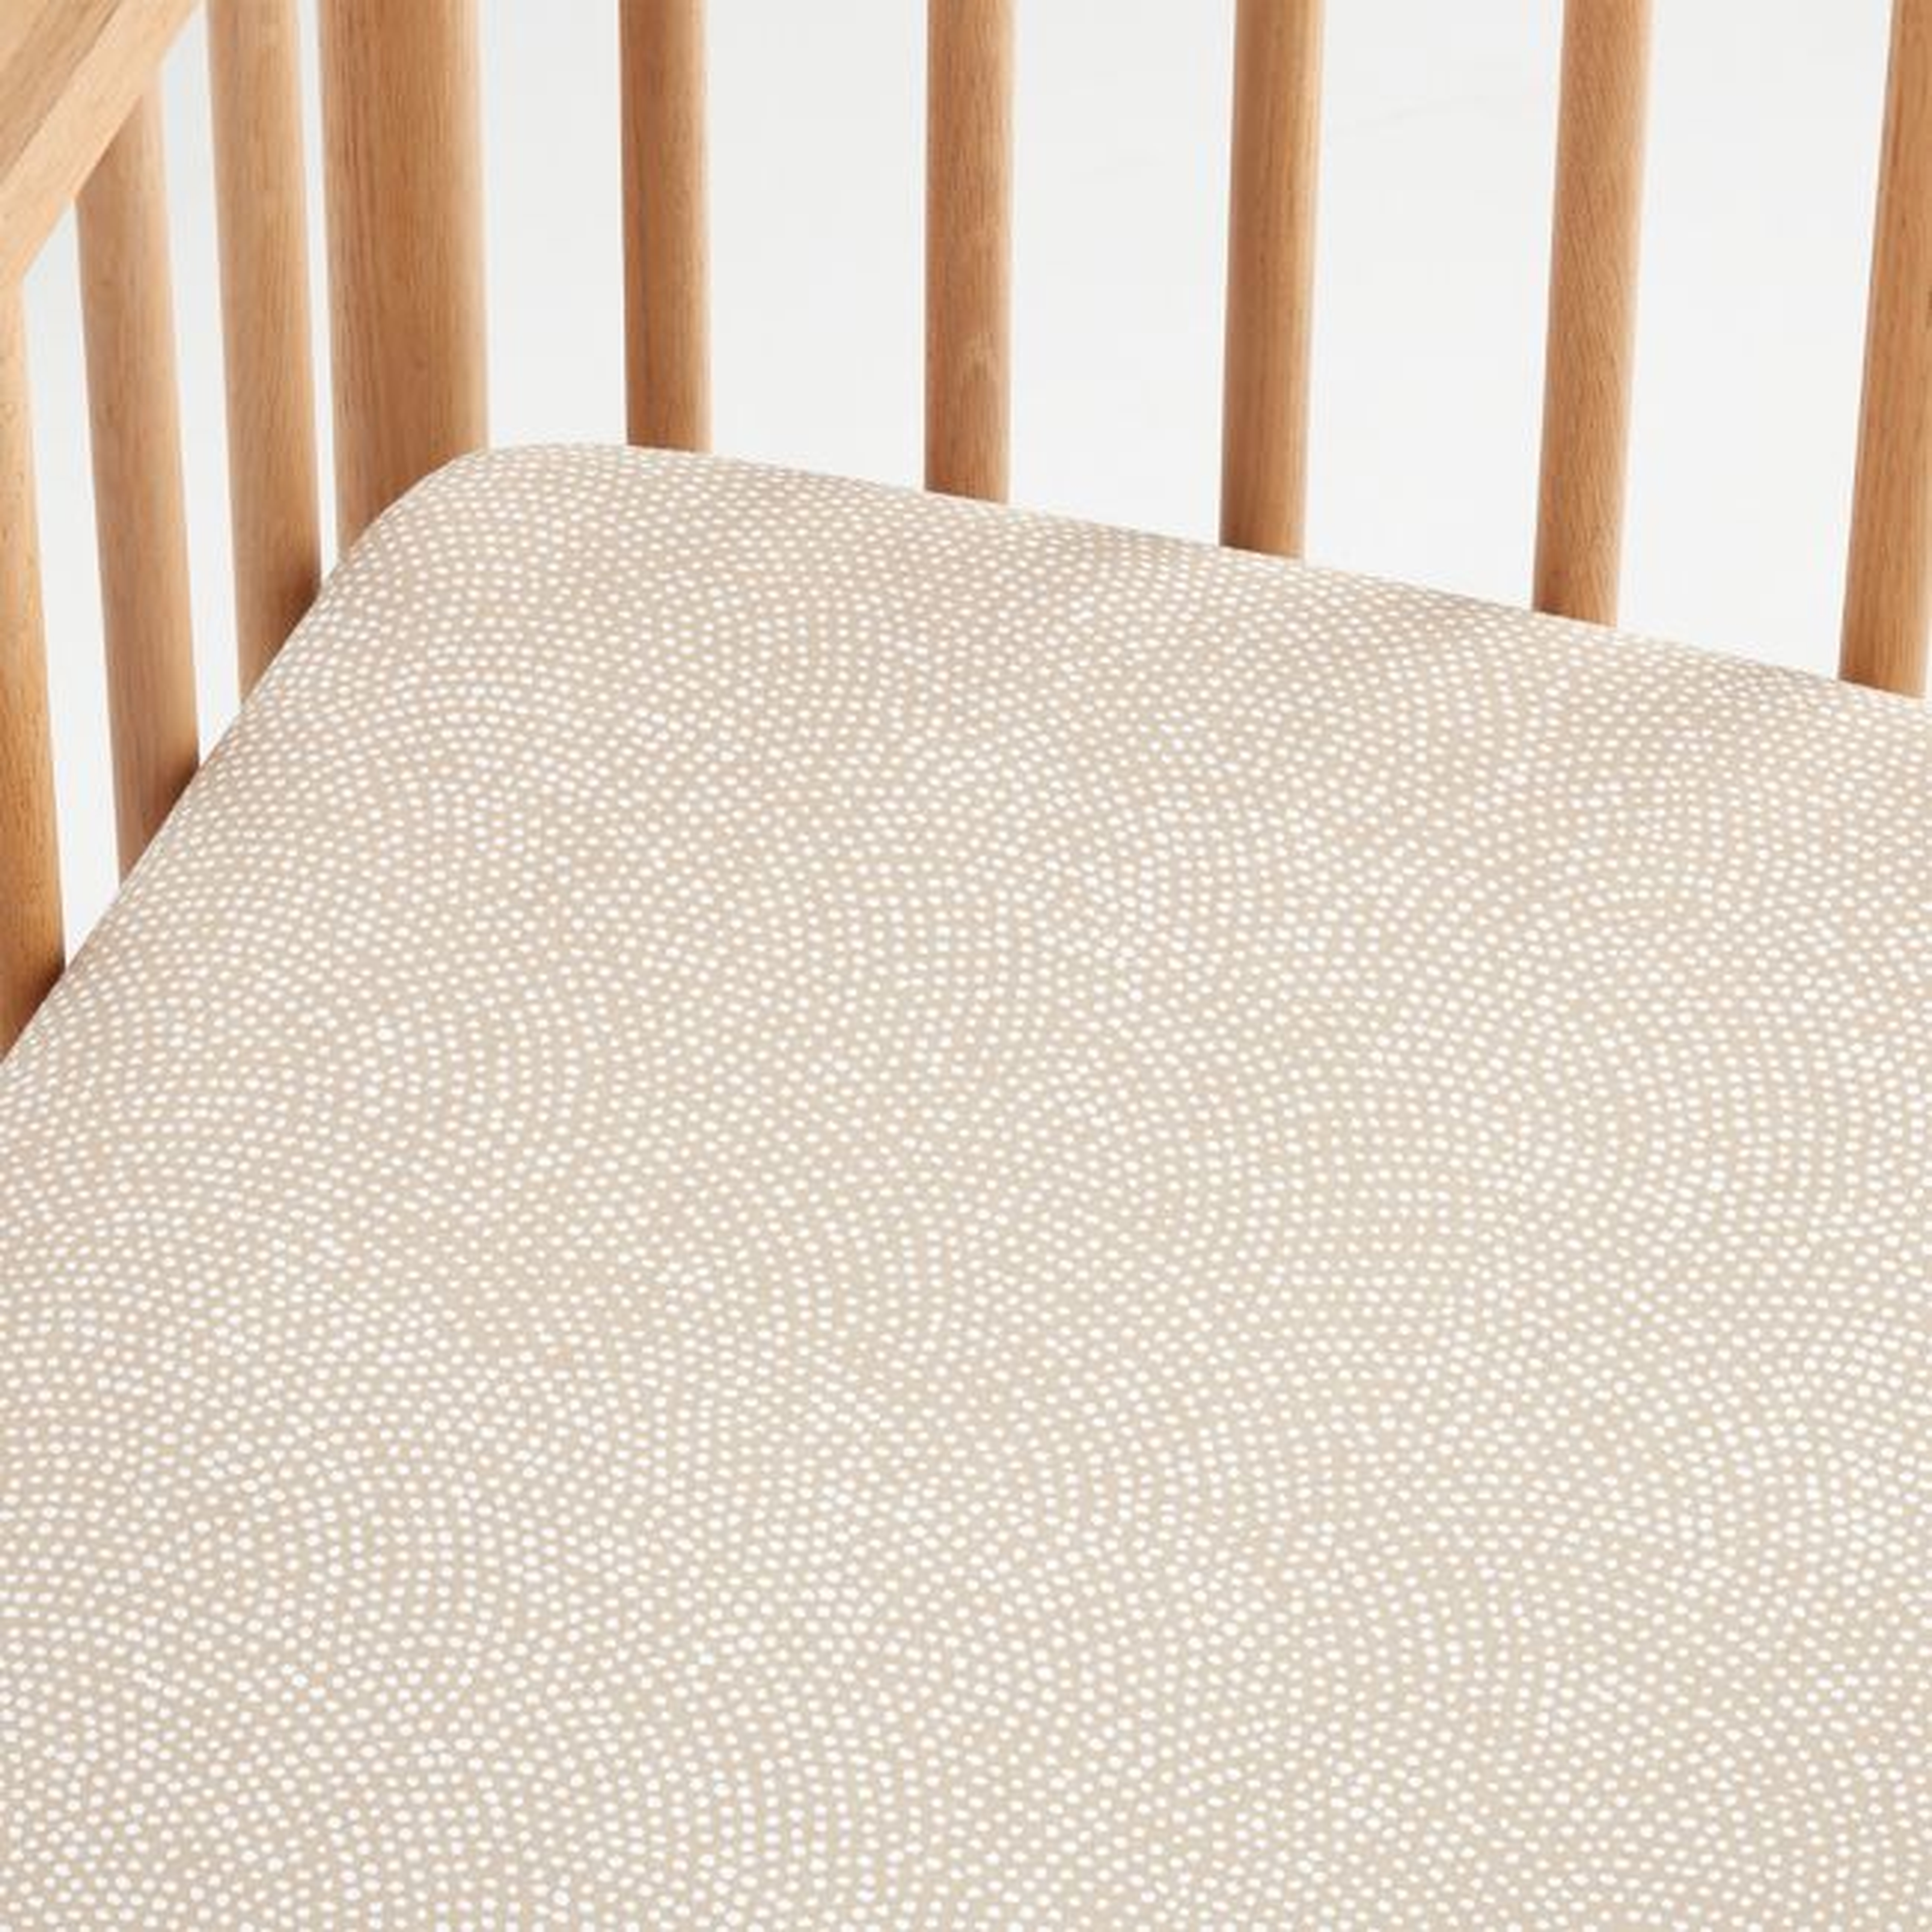 Batik Desert Organic Cotton Baby Crib Fitted Sheet by Leanne Ford - Crate and Barrel